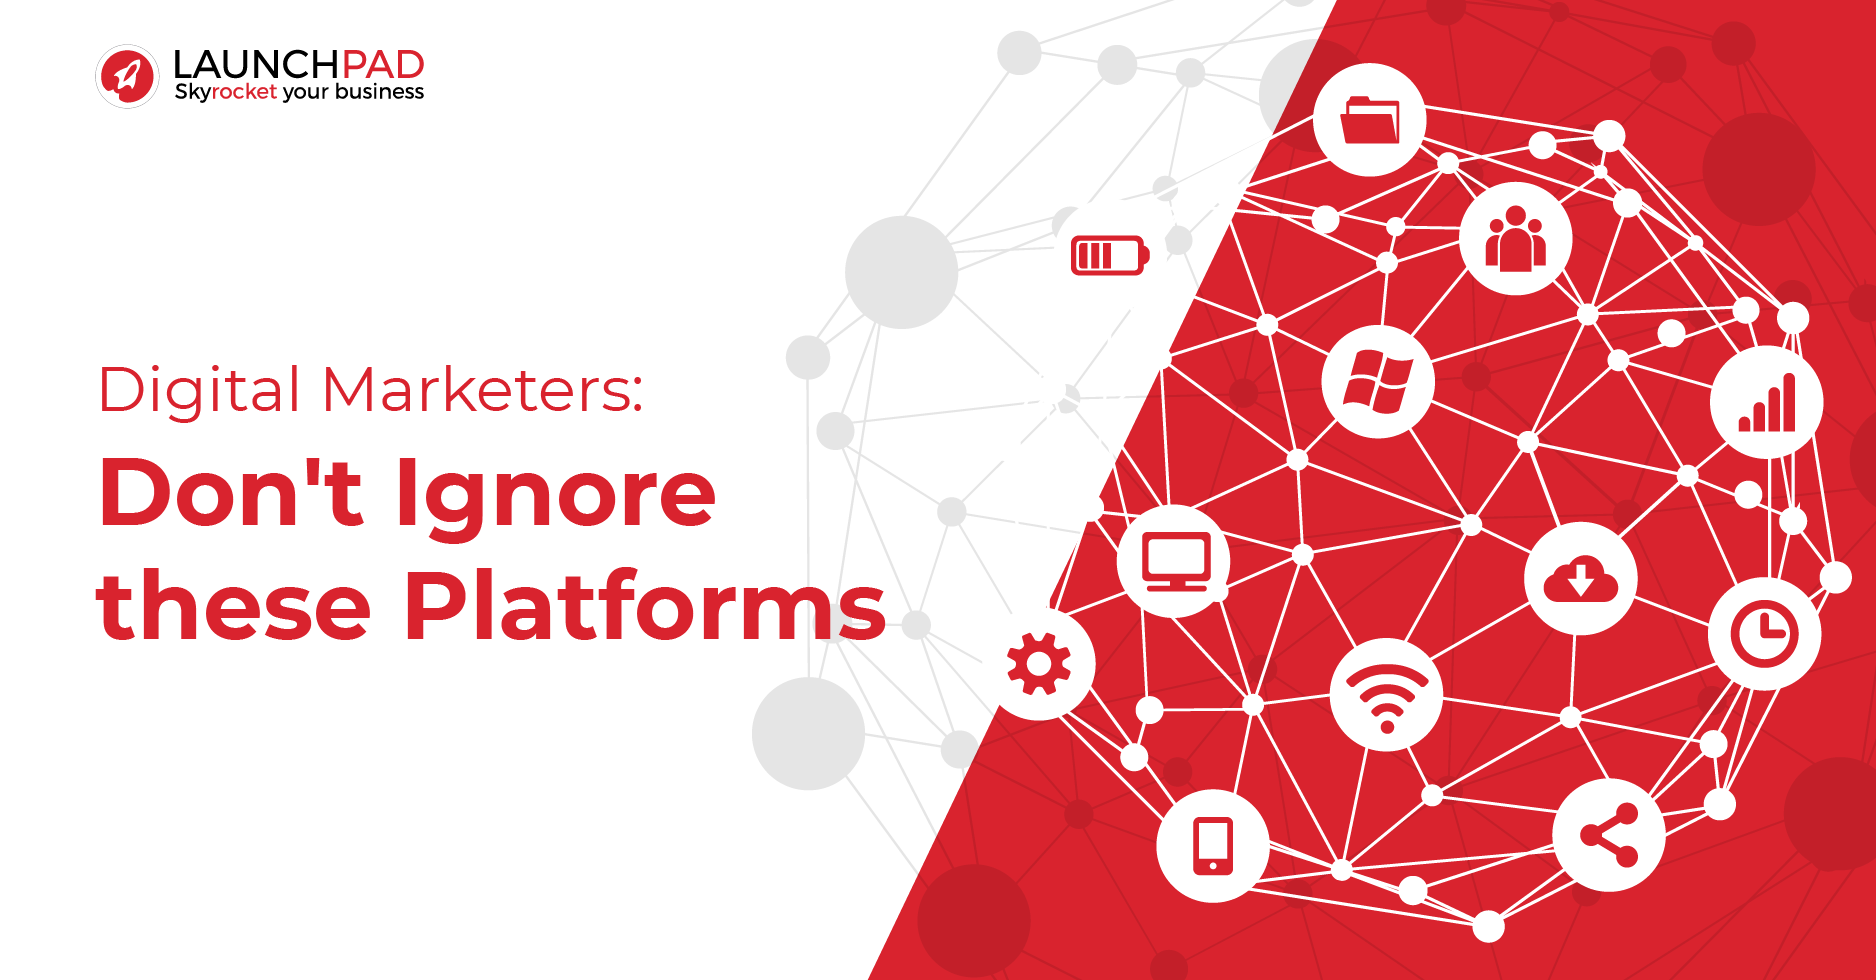 Digital Marketers: Don't ignore these platforms